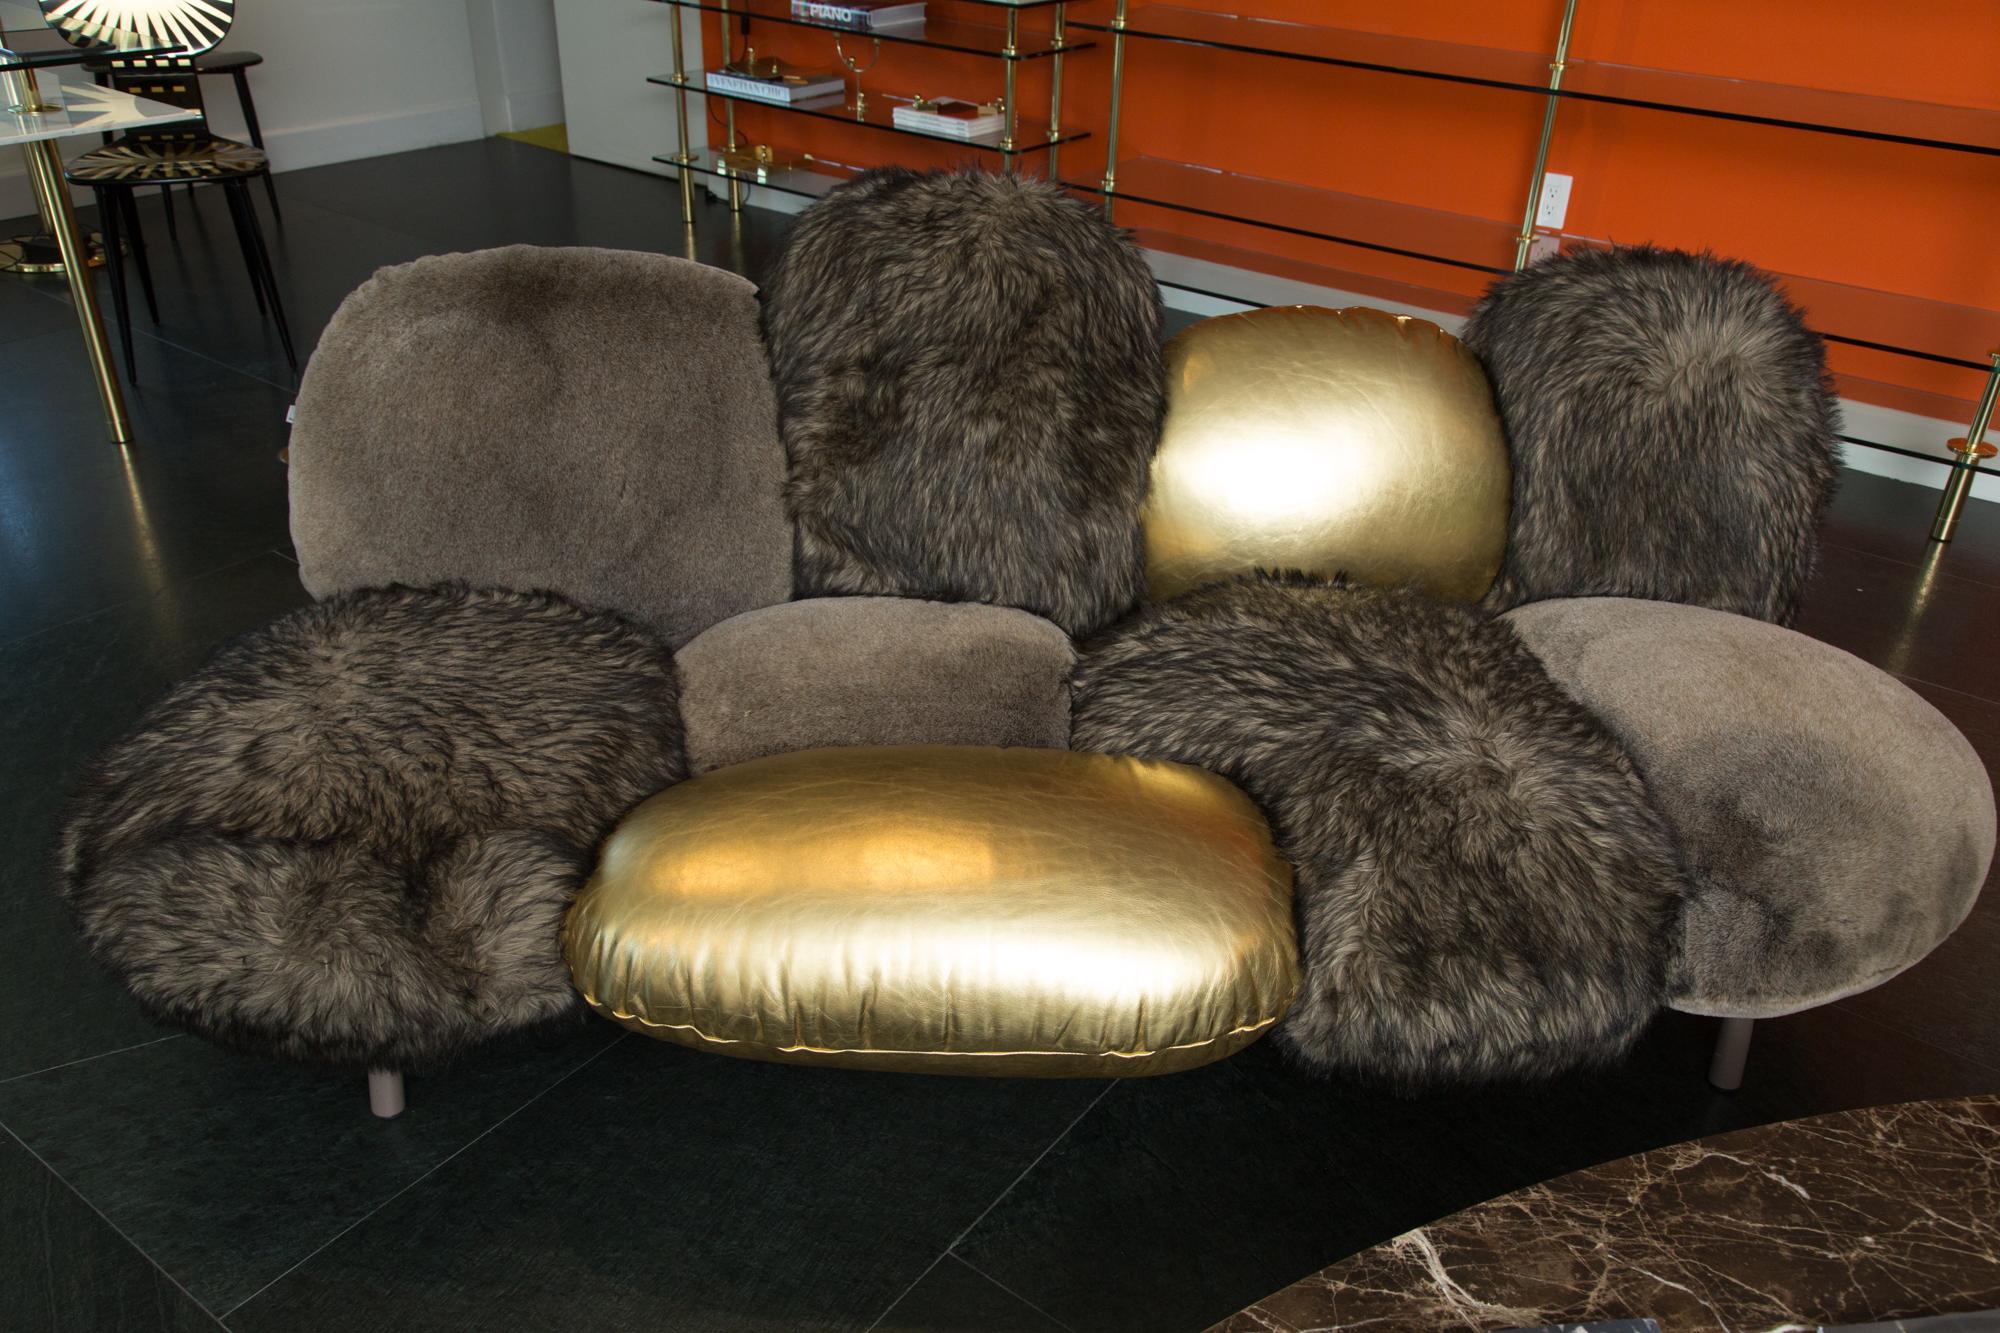 Cipria Sofa by Edra, Designed by the Campana Brothers im Zustand „Gut“ in LOS ANGELES, CA